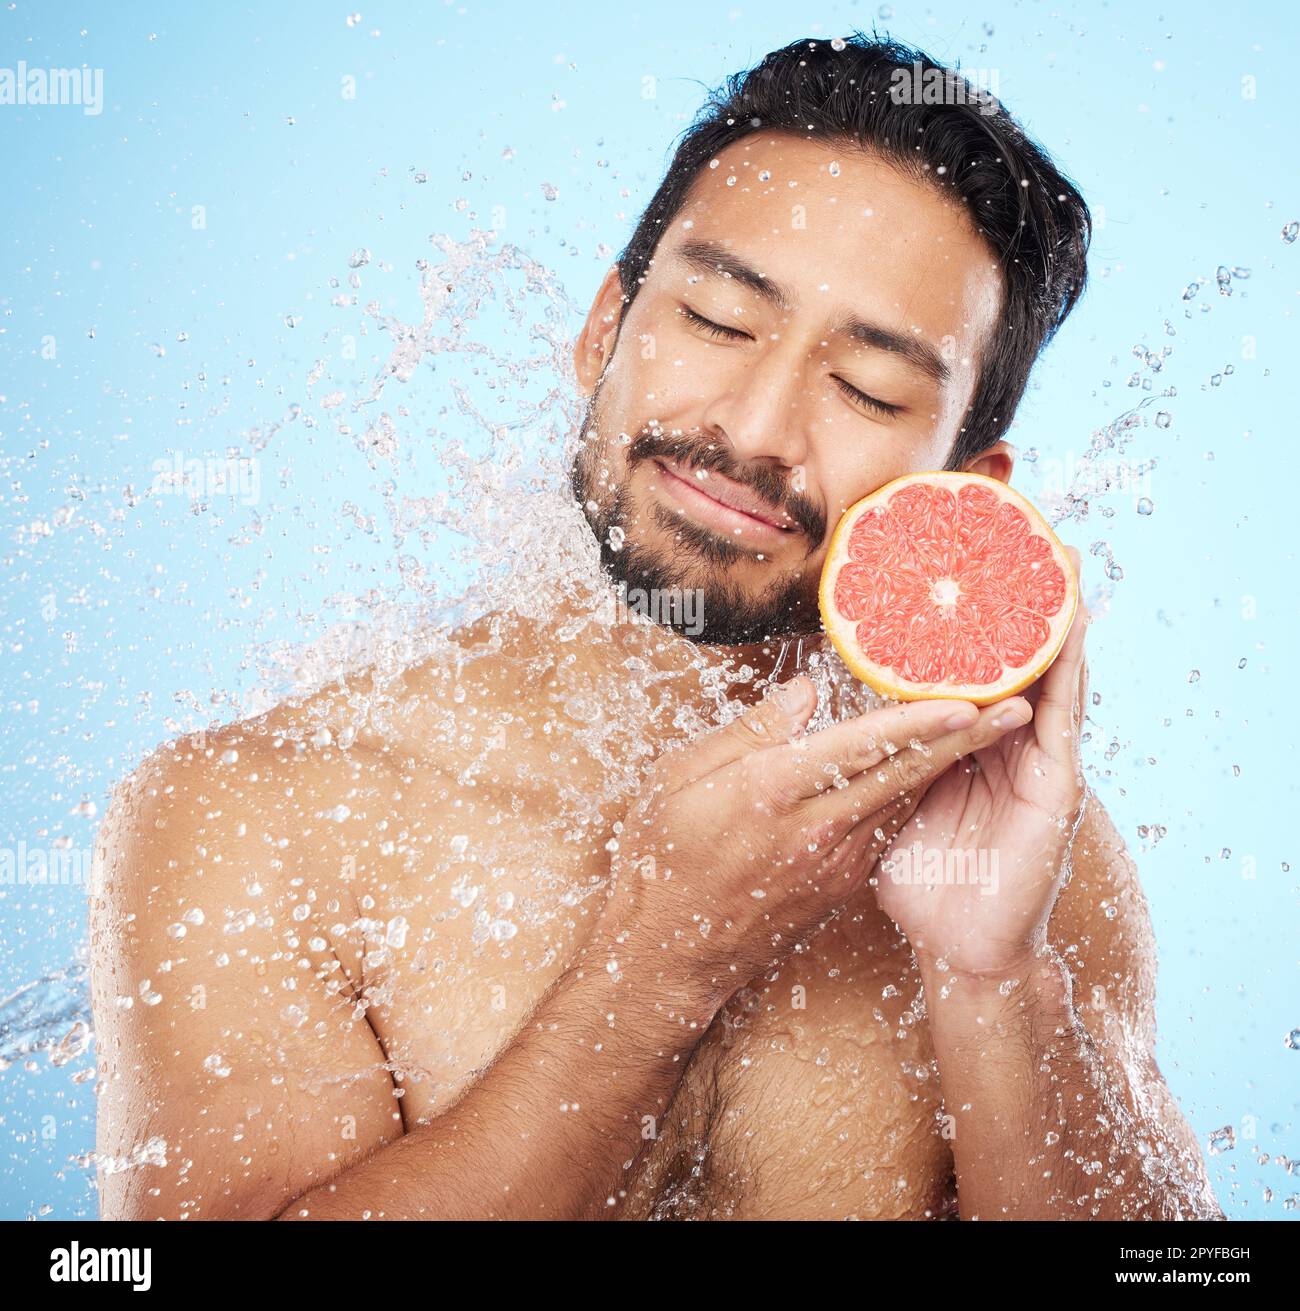 Face, water and grapefruit with a man model in studio on a blue background for hygiene or natural hydration. Skincare, beauty or fruit with a handsome young male wet from a water splash in the shower Stock Photo